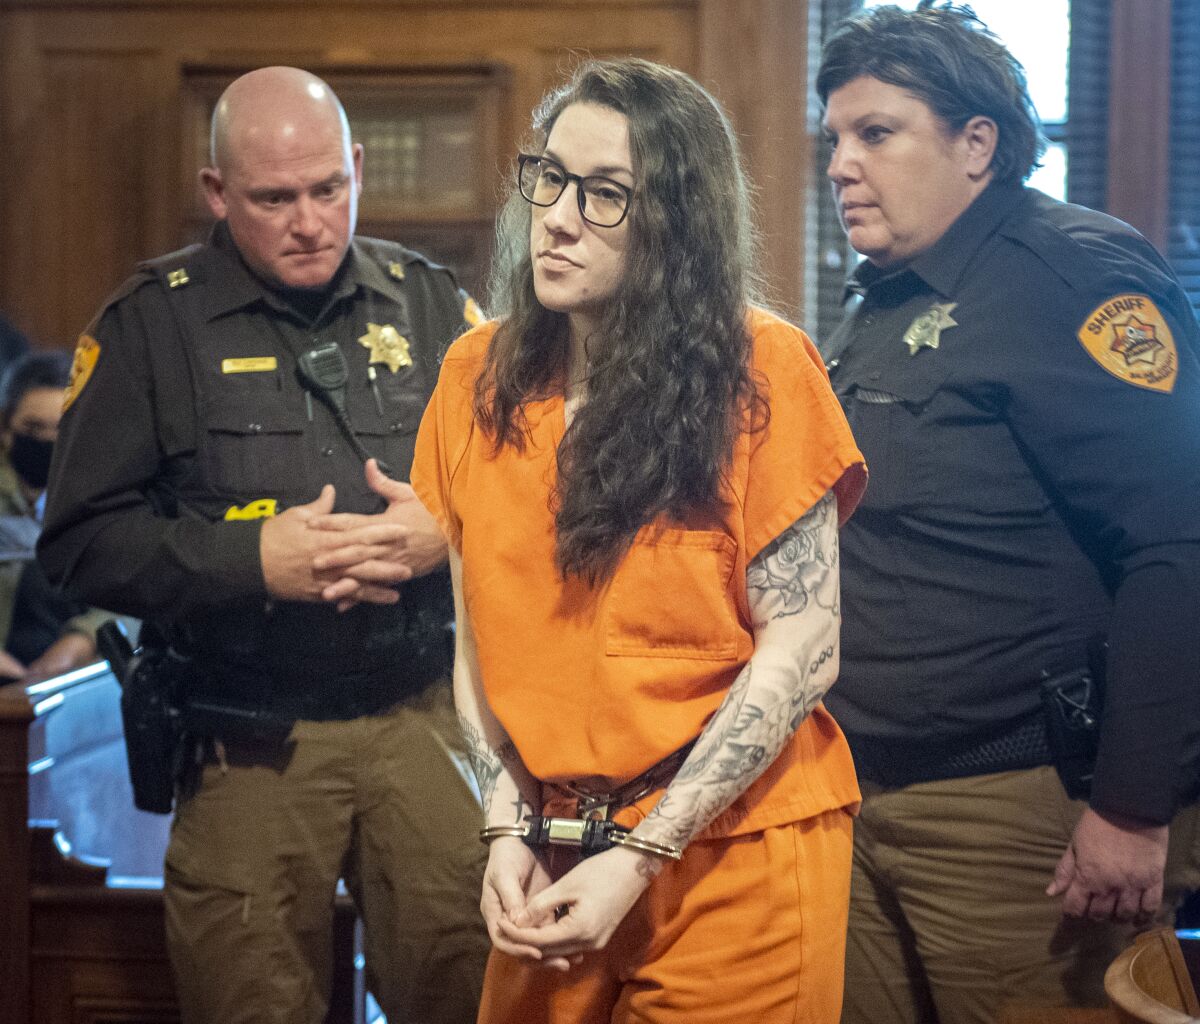 Bailey Boswell walks out of the courtroom after being sentenced to life in prison without parole for the 2017 murder of Sydney Loofe, Monday, Nov. 8, 2021, in Wilber, Neb. (Justin Wan/Lincoln Journal Star via AP)